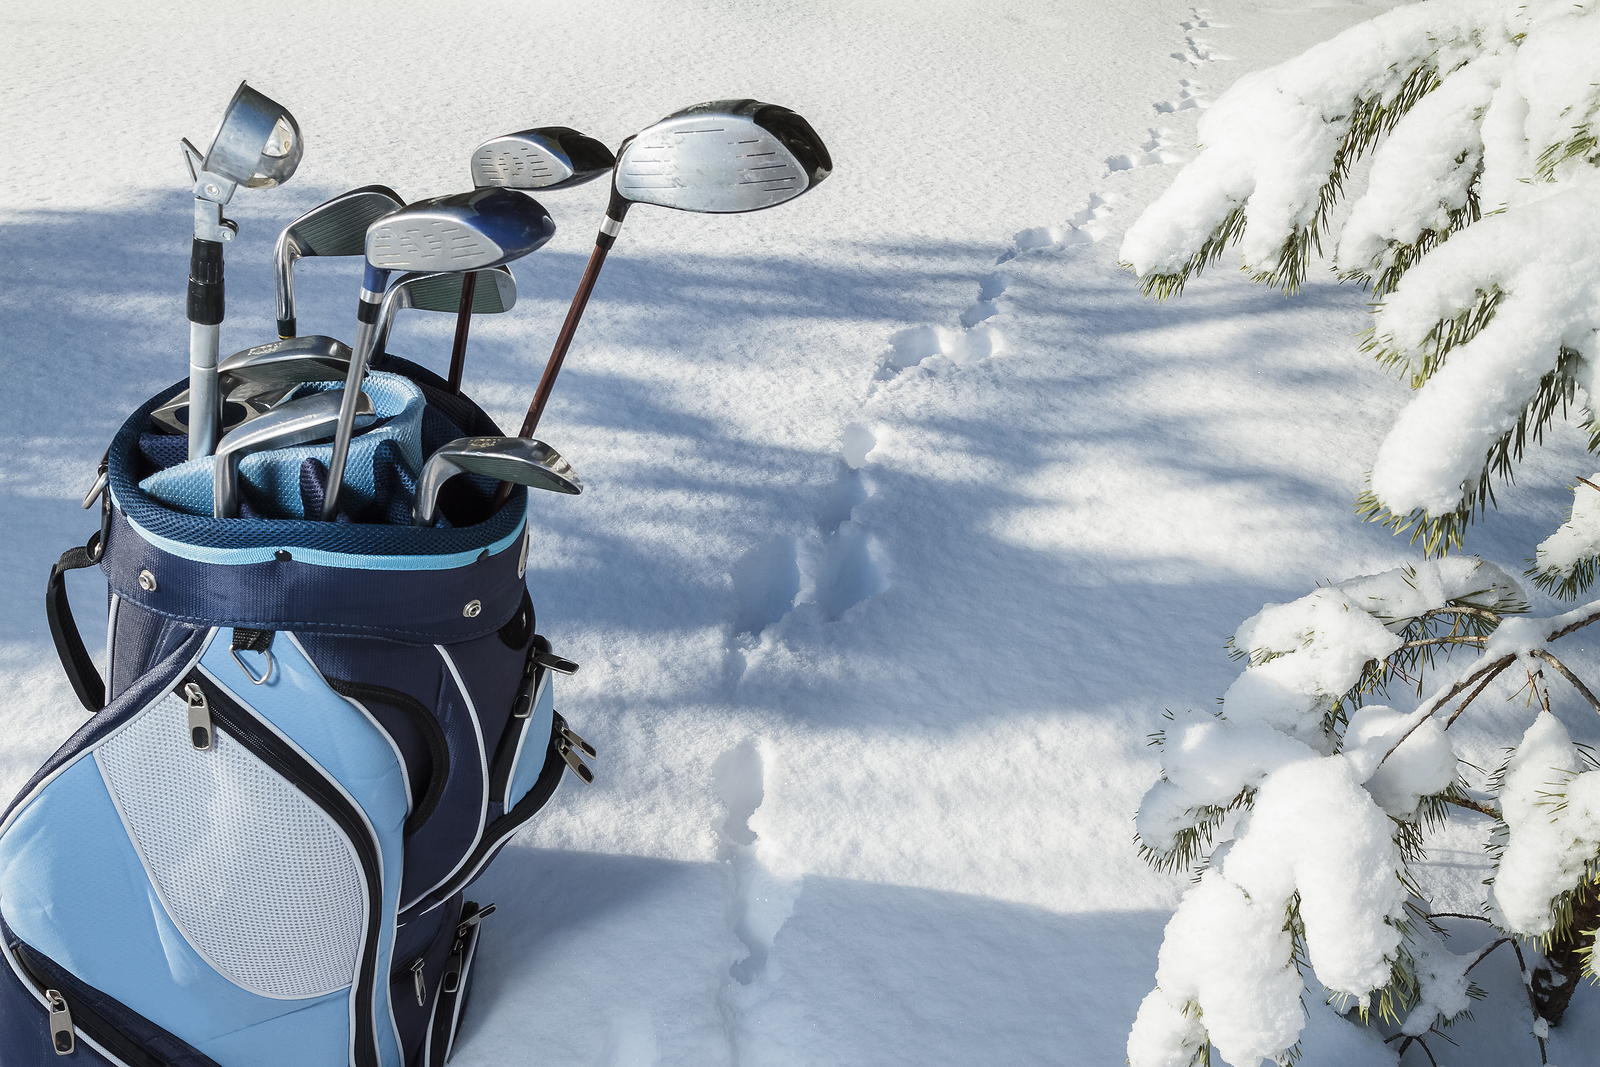 7 Winter Golf Tips to Help Keep Your Game Sharp Until Spring